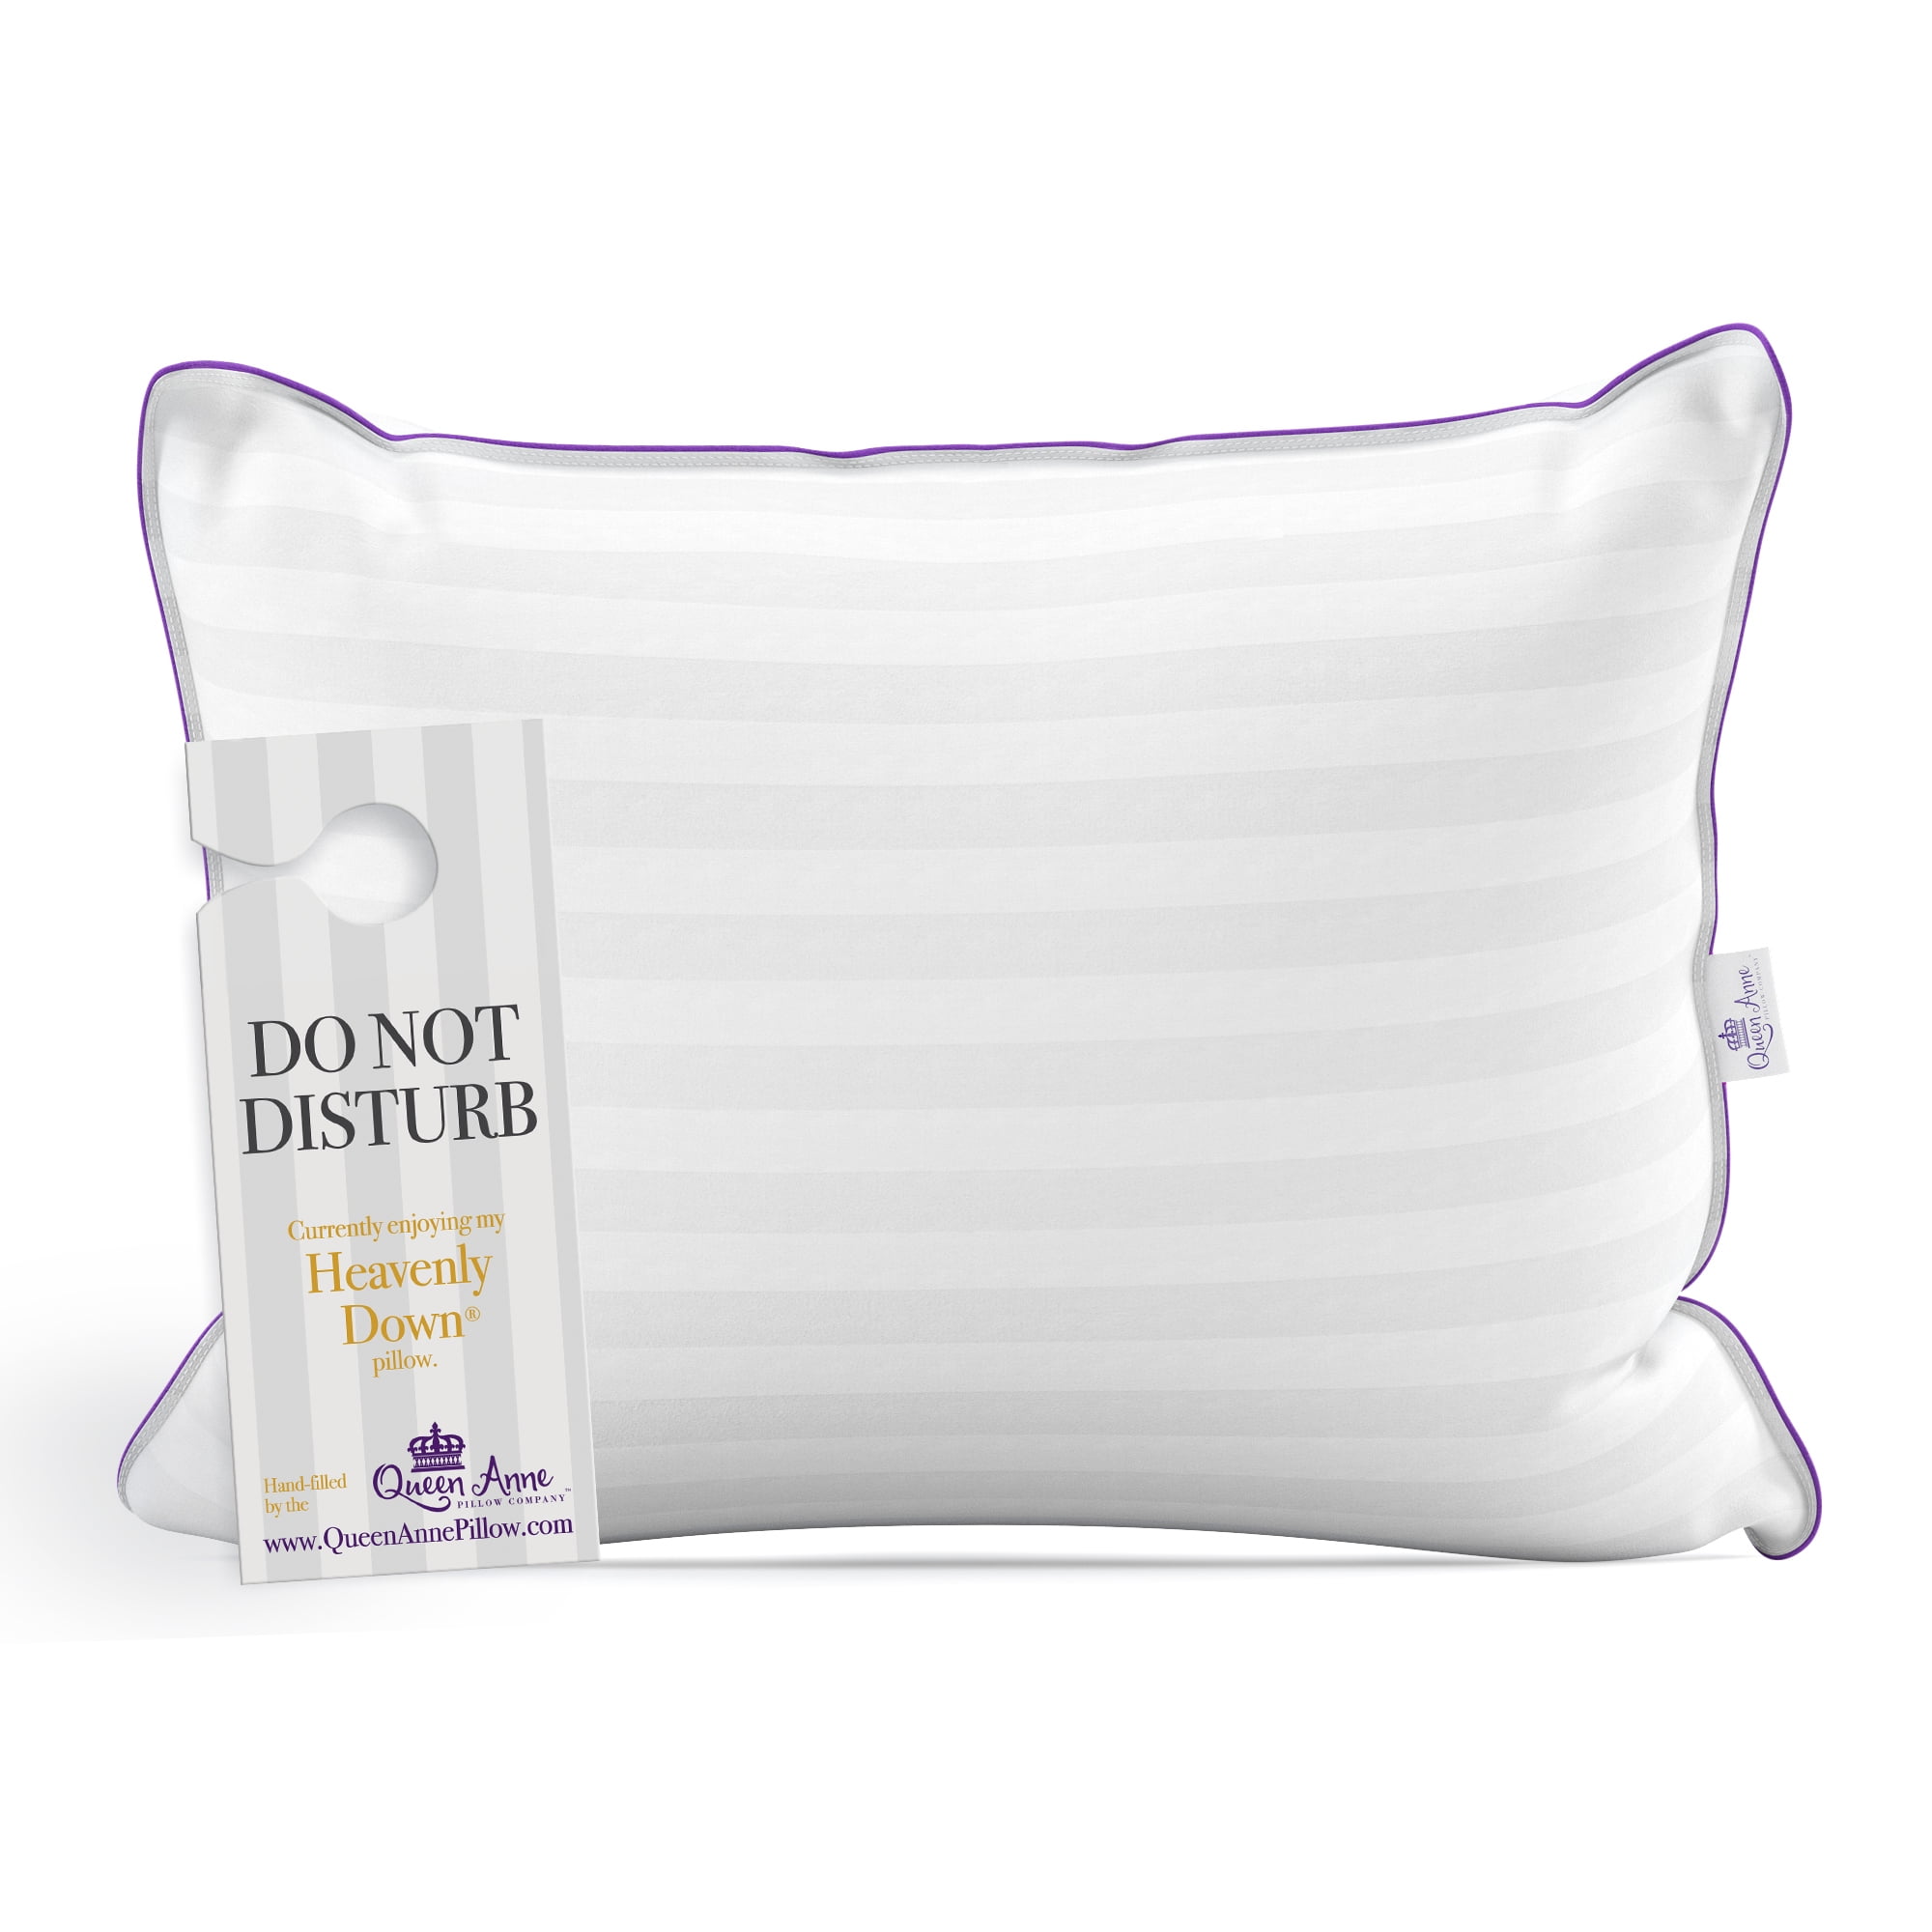 High-End Luxury Hotel Pillow&ndash; Exclusive Down Alternative (King Medium Pillow) The Heavenly Down Allergy-Free Pillow. Performs like plush Goose Down. Only by Queen Anne Pillow. Made in the U.S.A